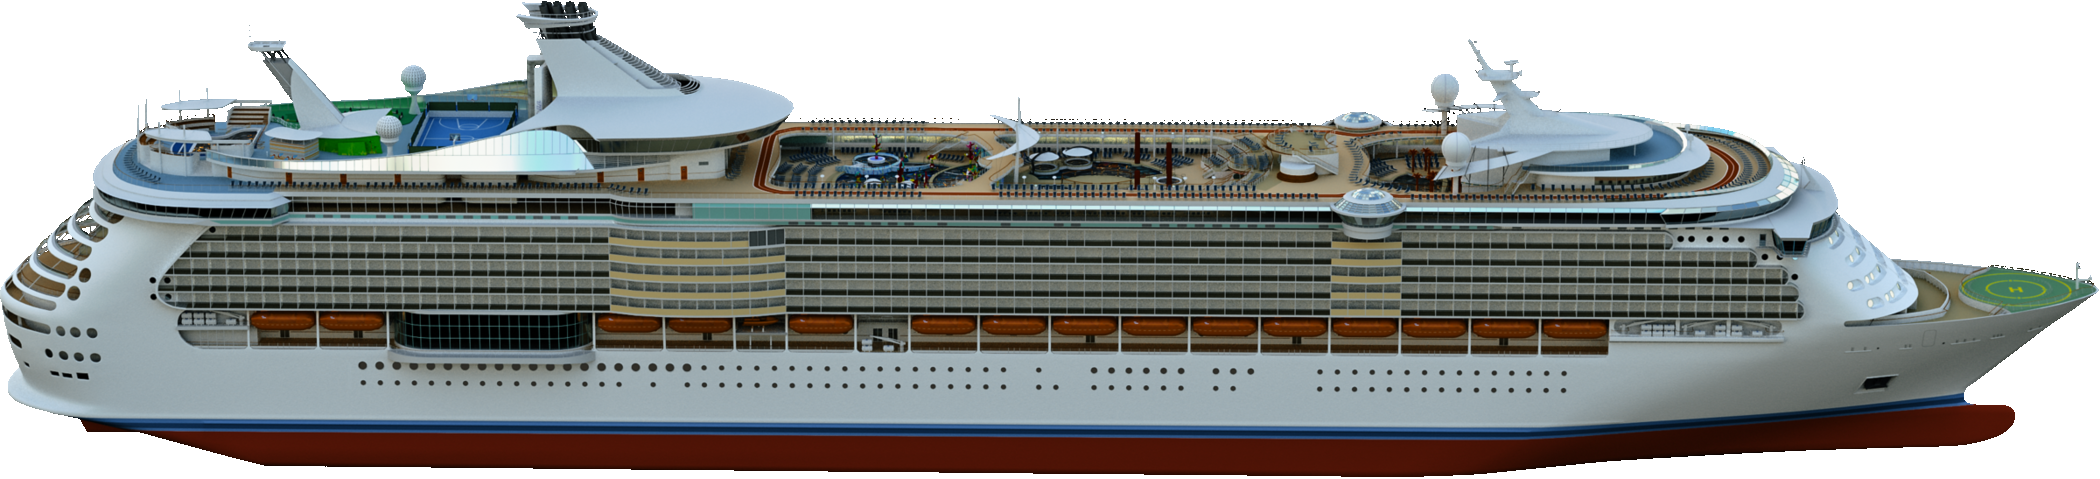 Cruise Ship PNG Images HD